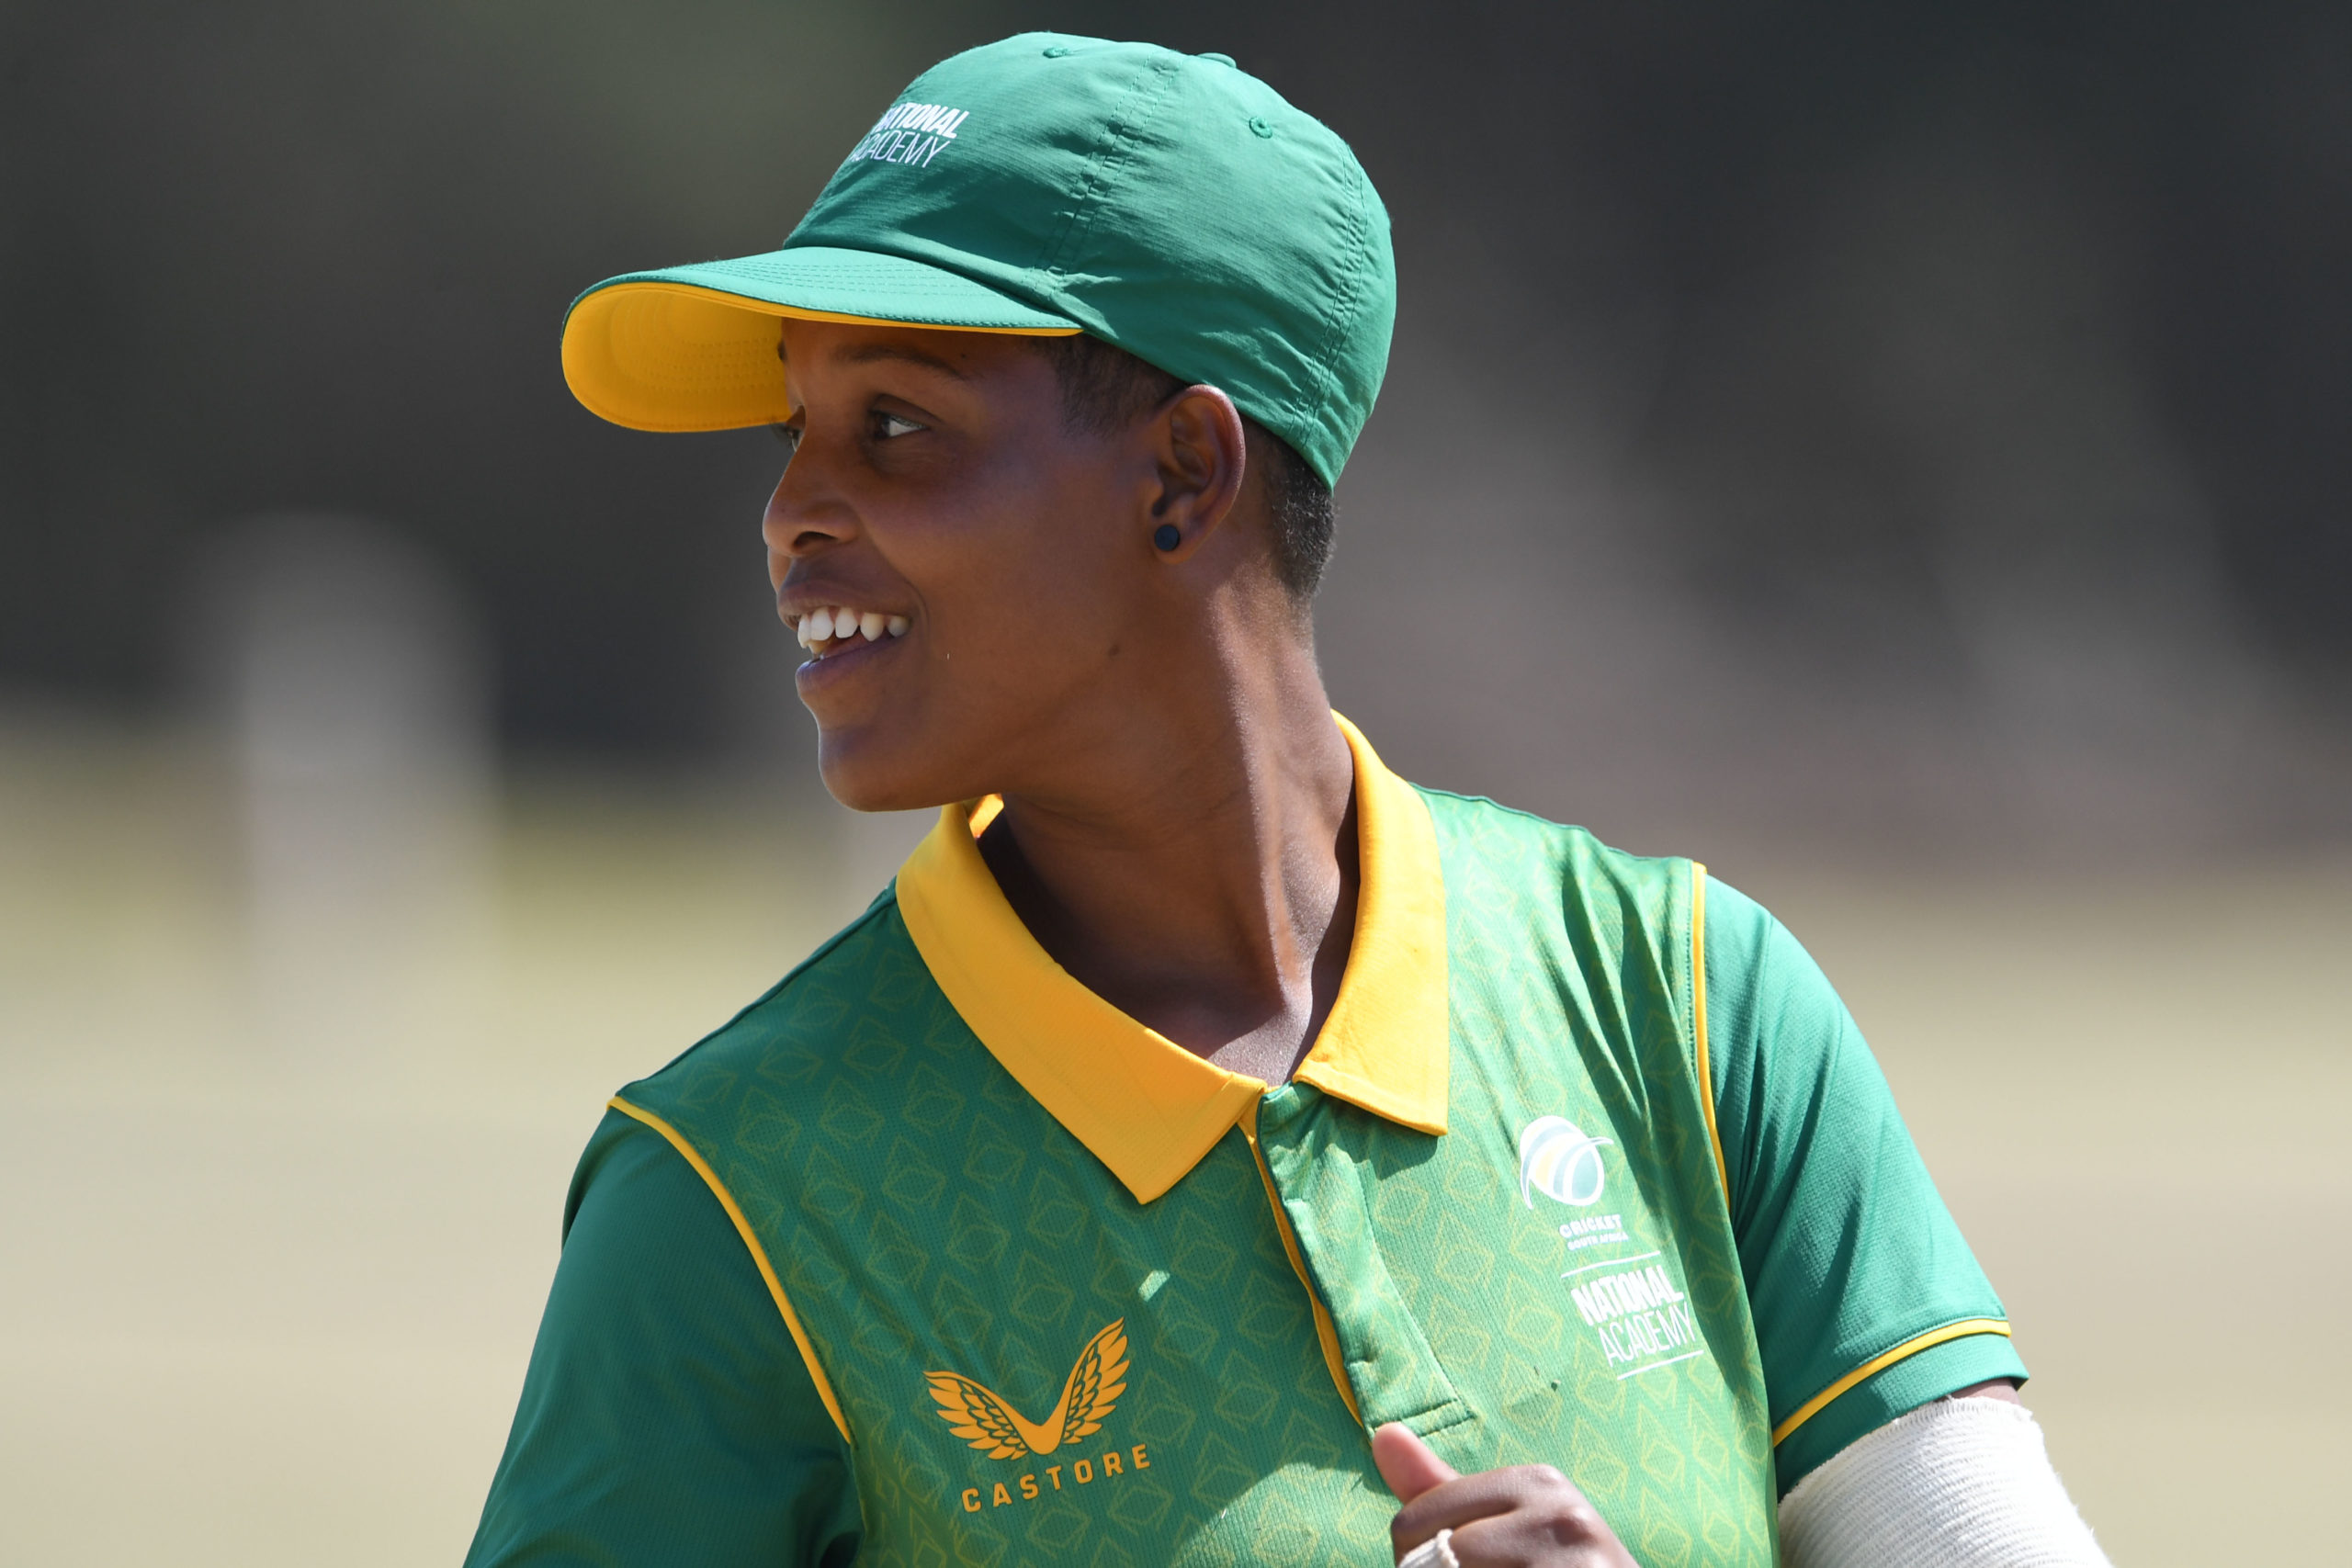 CSA: Garden Route Badger’s Micaéla Andrews ready for 2022 / 23 after emotional promotion and her “best season”